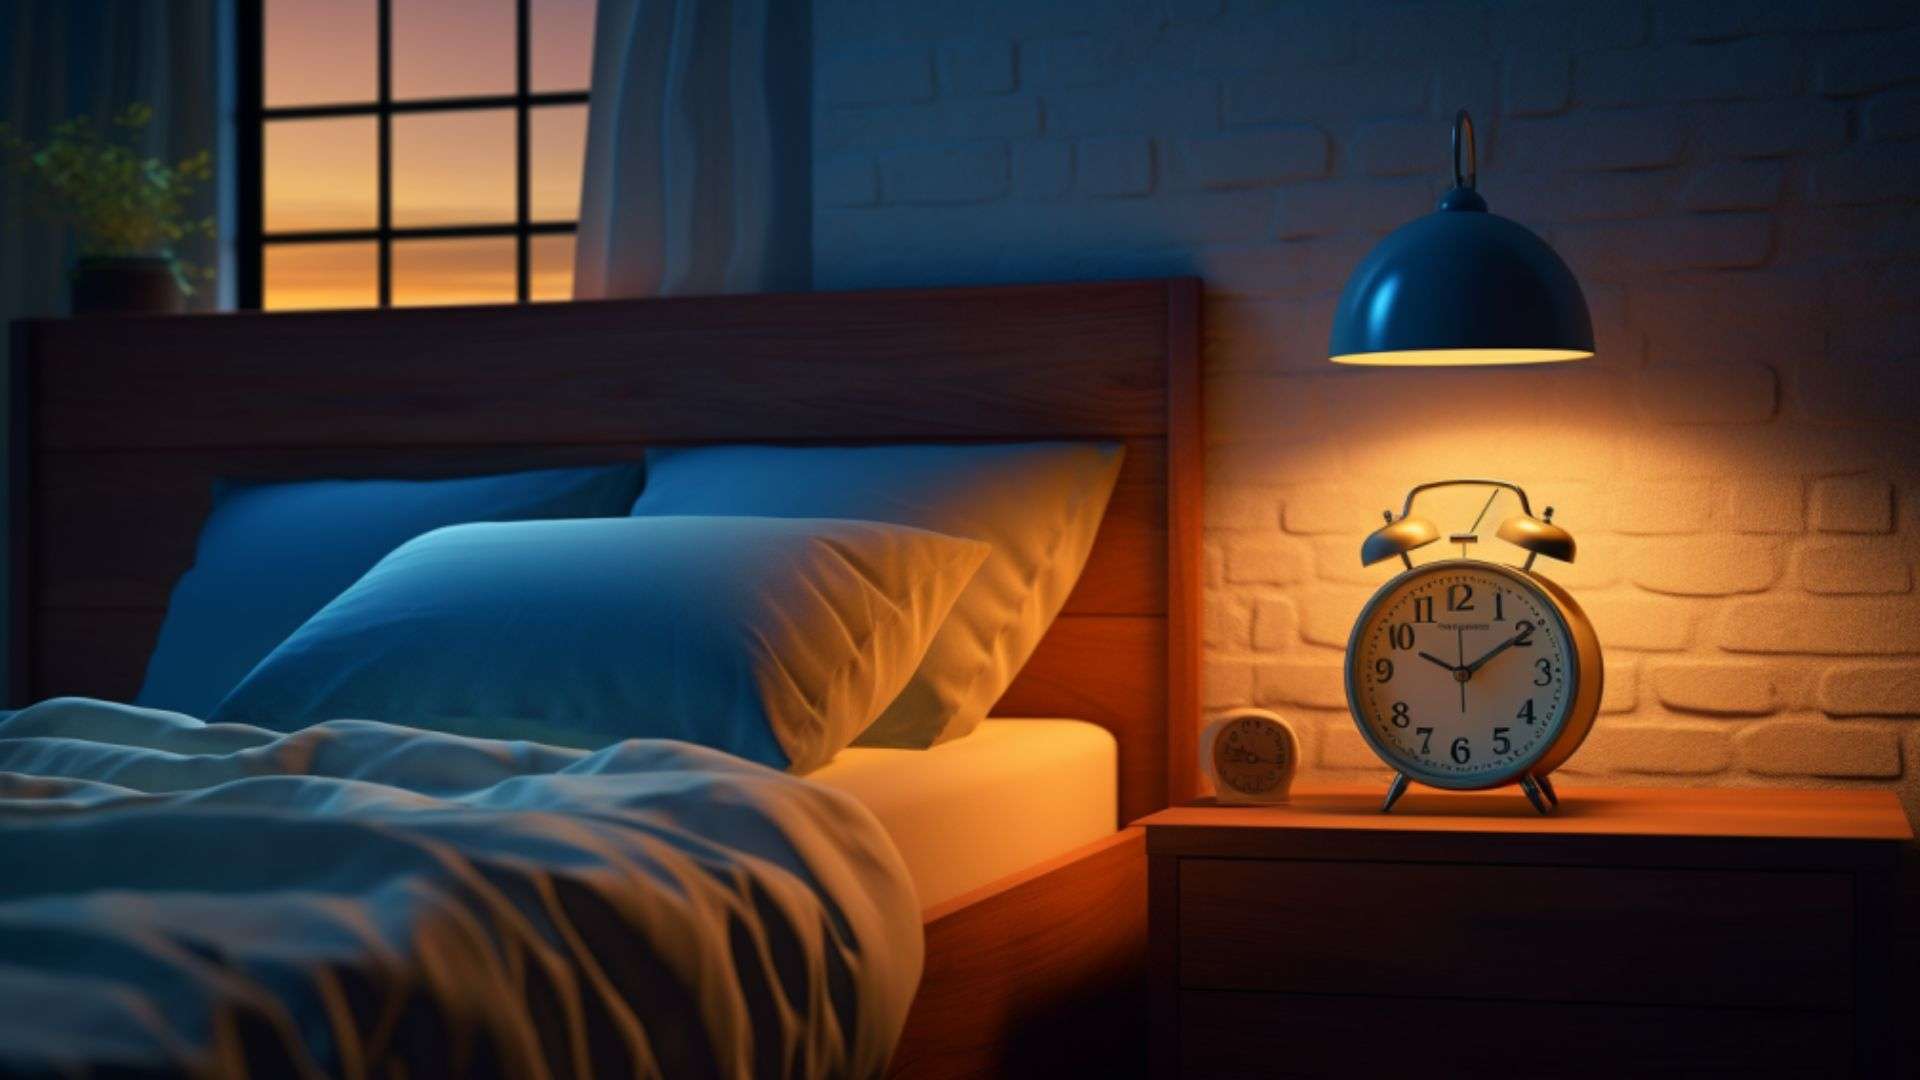 A peaceful bedroom setting highlighting the wake back to bed method for enhanced sleep and lucid dreaming experiences.